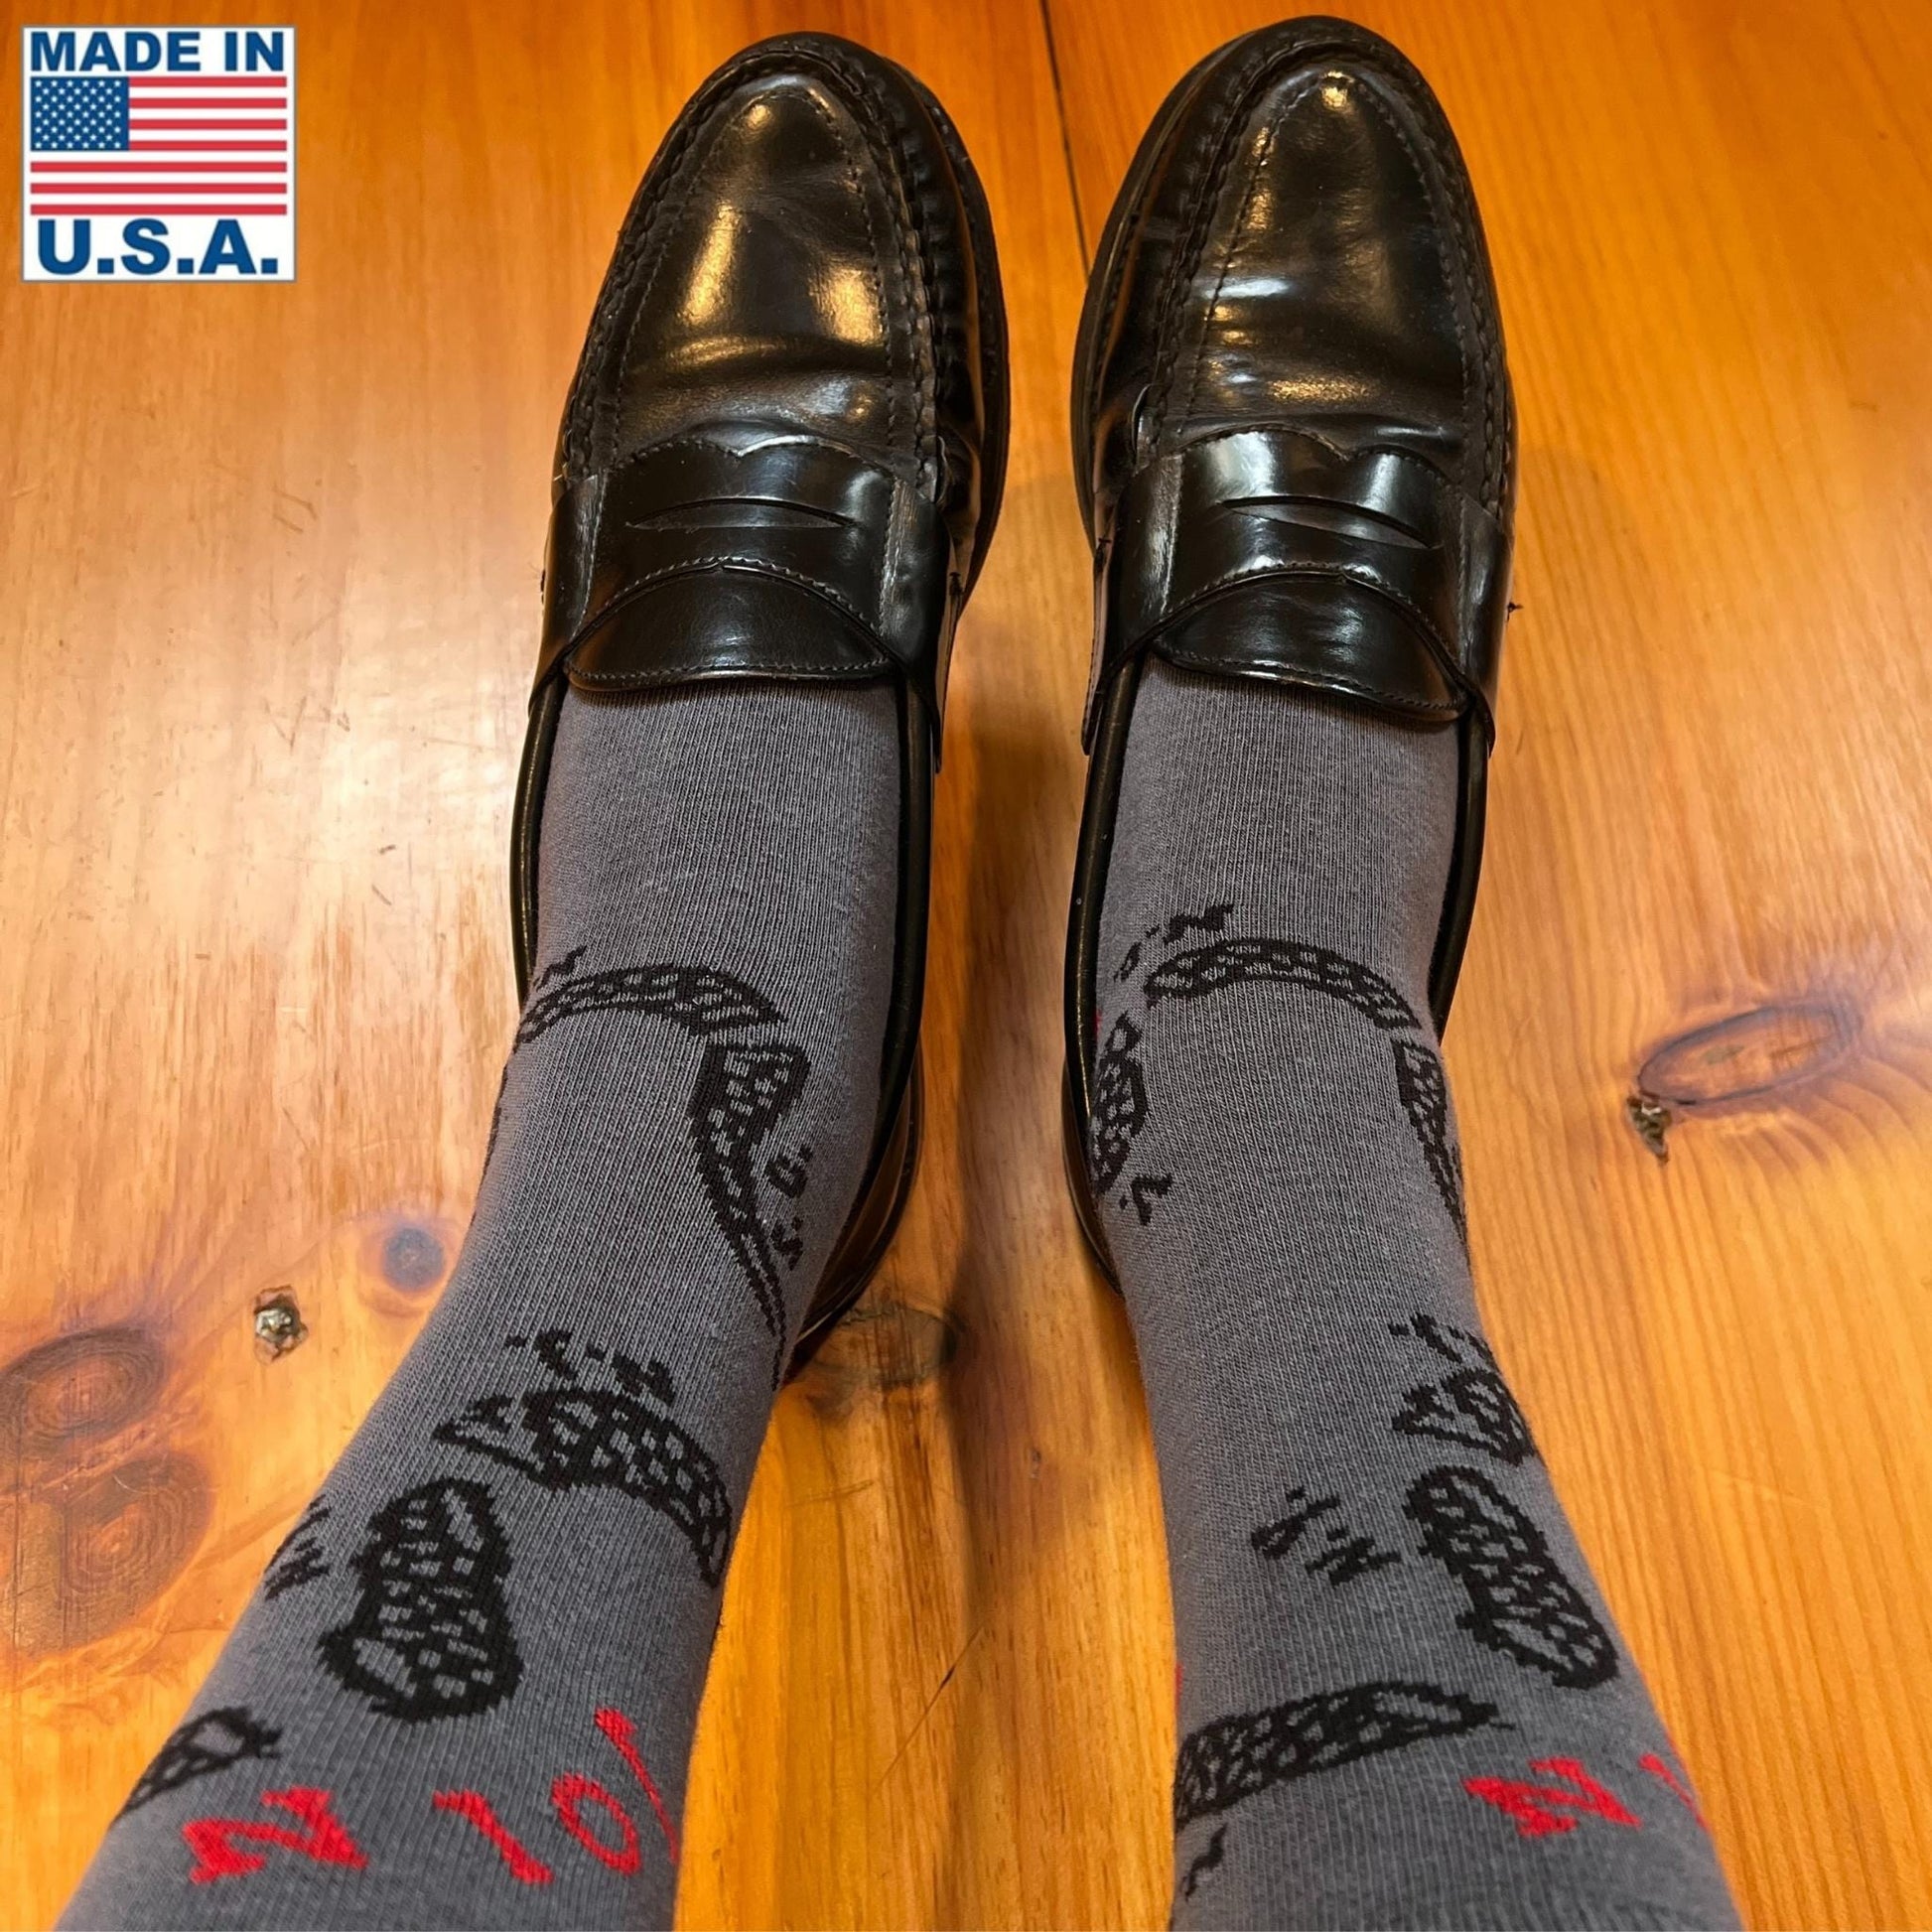 Top view of "Join or Die" Socks — Made in USA from The HIstory List store when worn with shoes 